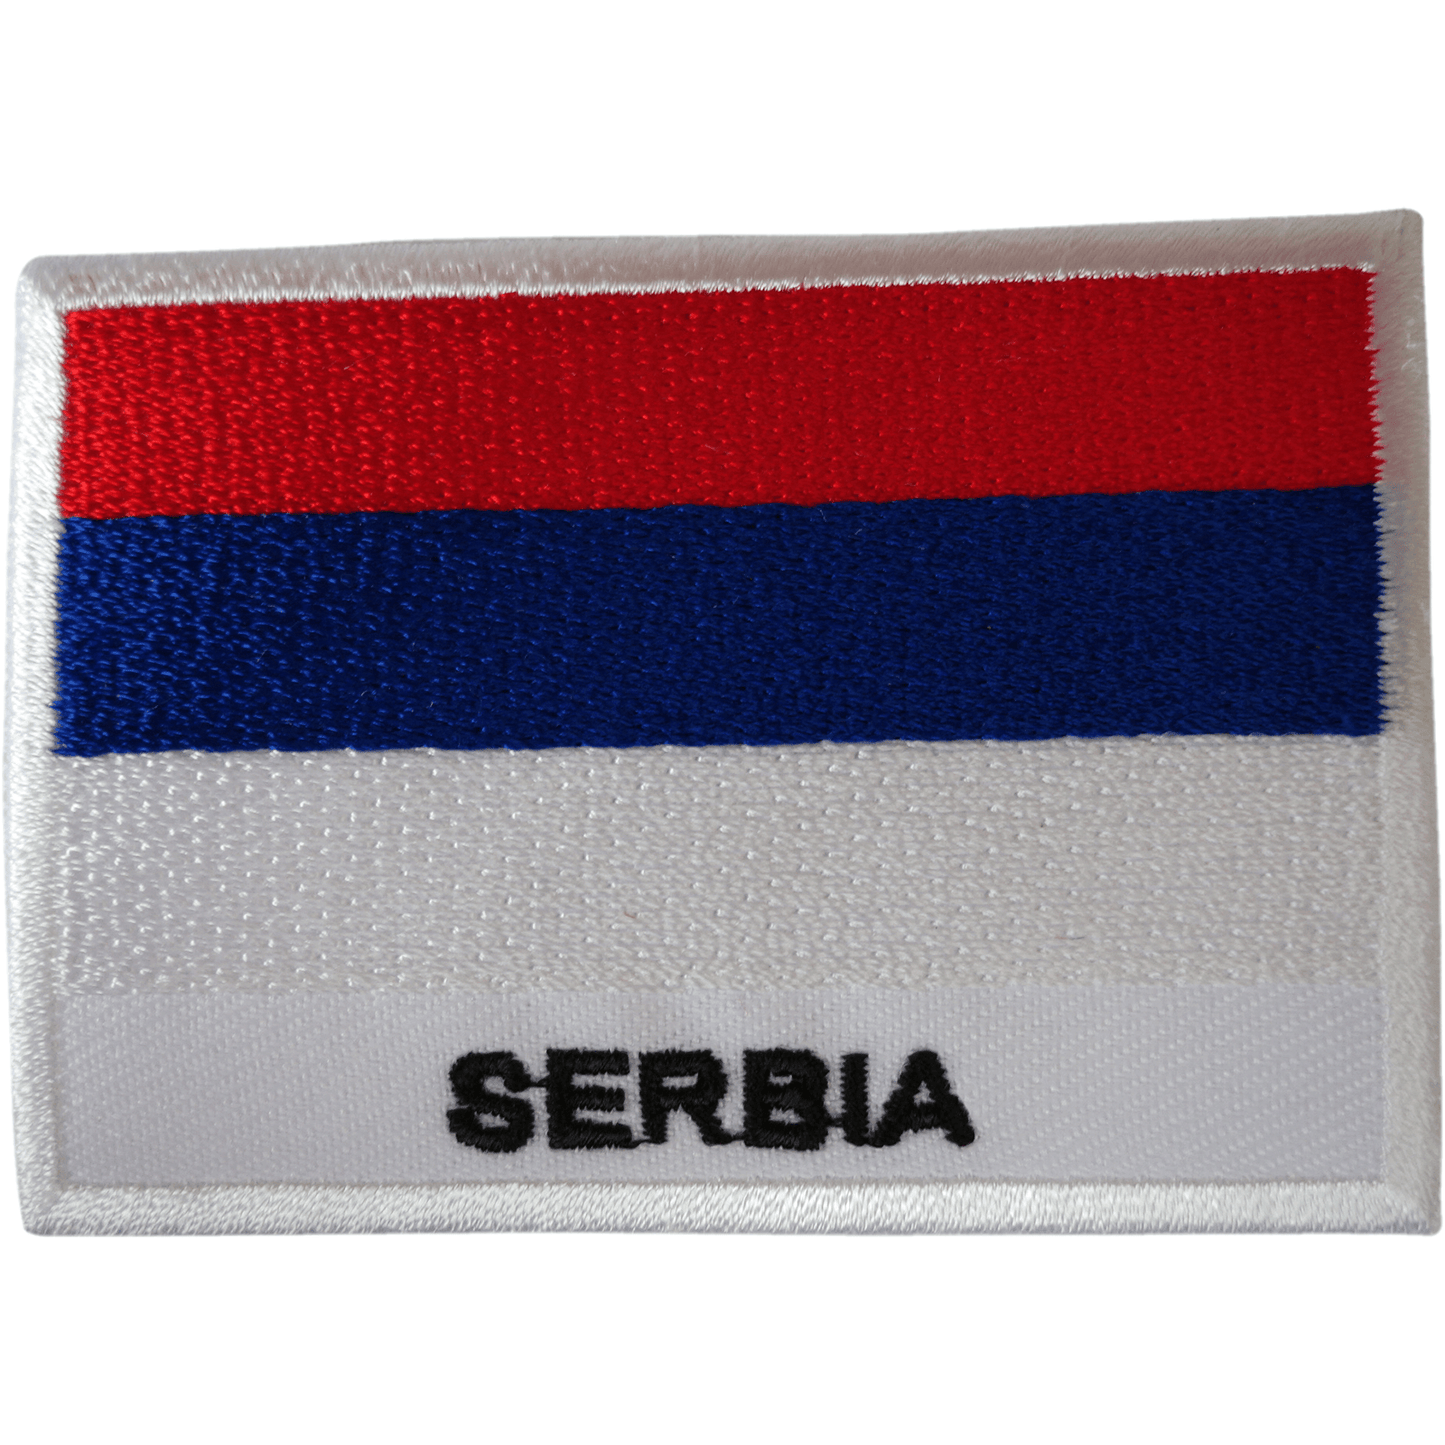 Serbia Flag Patch Iron Sew On Clothes Bag Serbian Embroidery Embroidered Badge